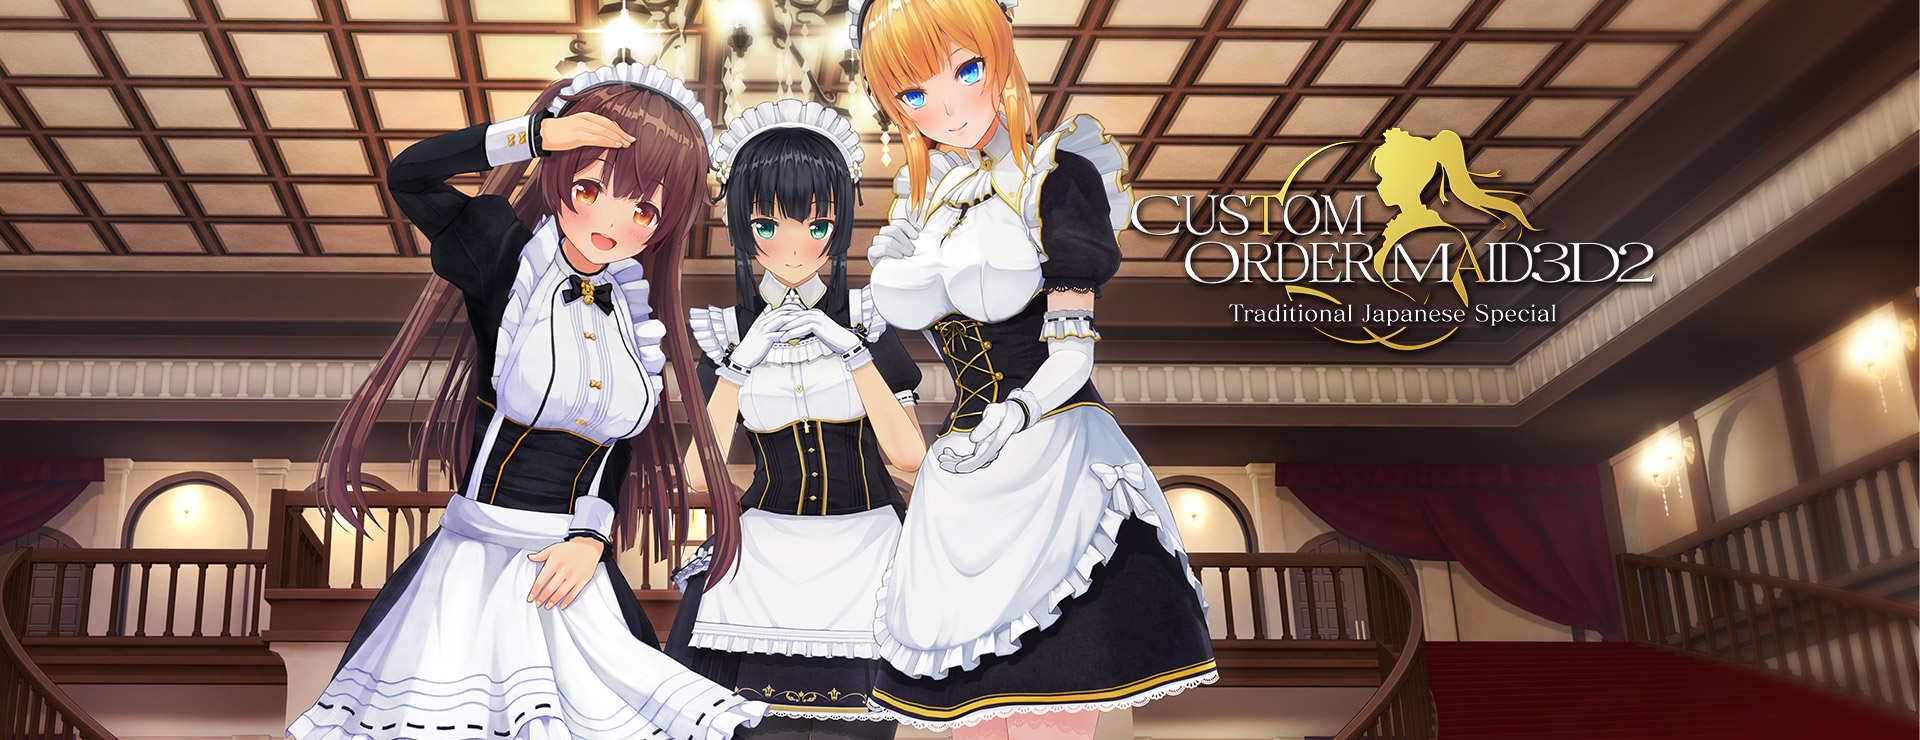 Custom Order Maid 3D2: Traditional Japanese Special All in Pack - Simulation Spiel